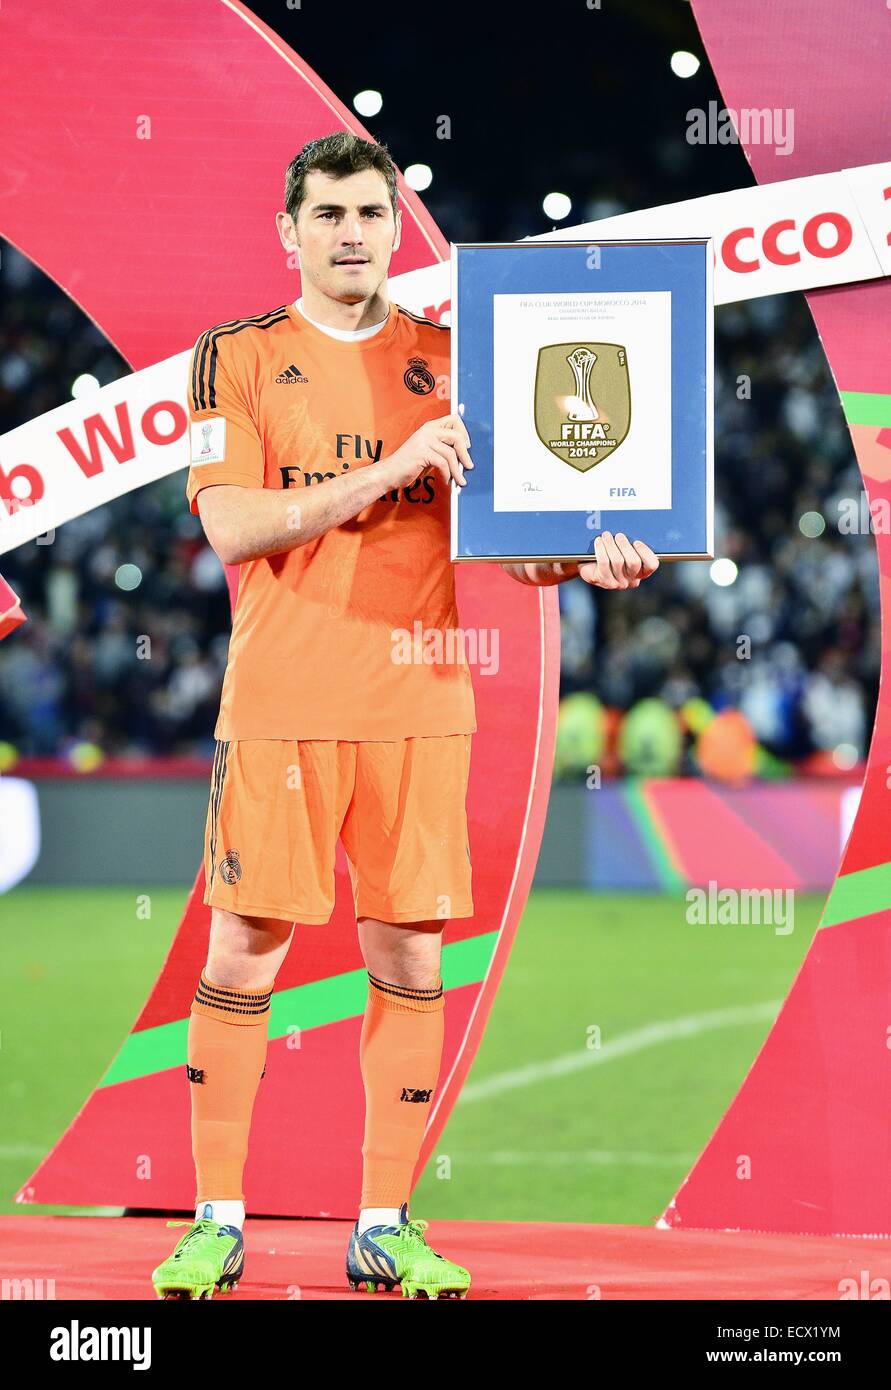 Iker Casillas of Real Madrid with the Official FIFA Champions Badge News  Photo - Getty Images